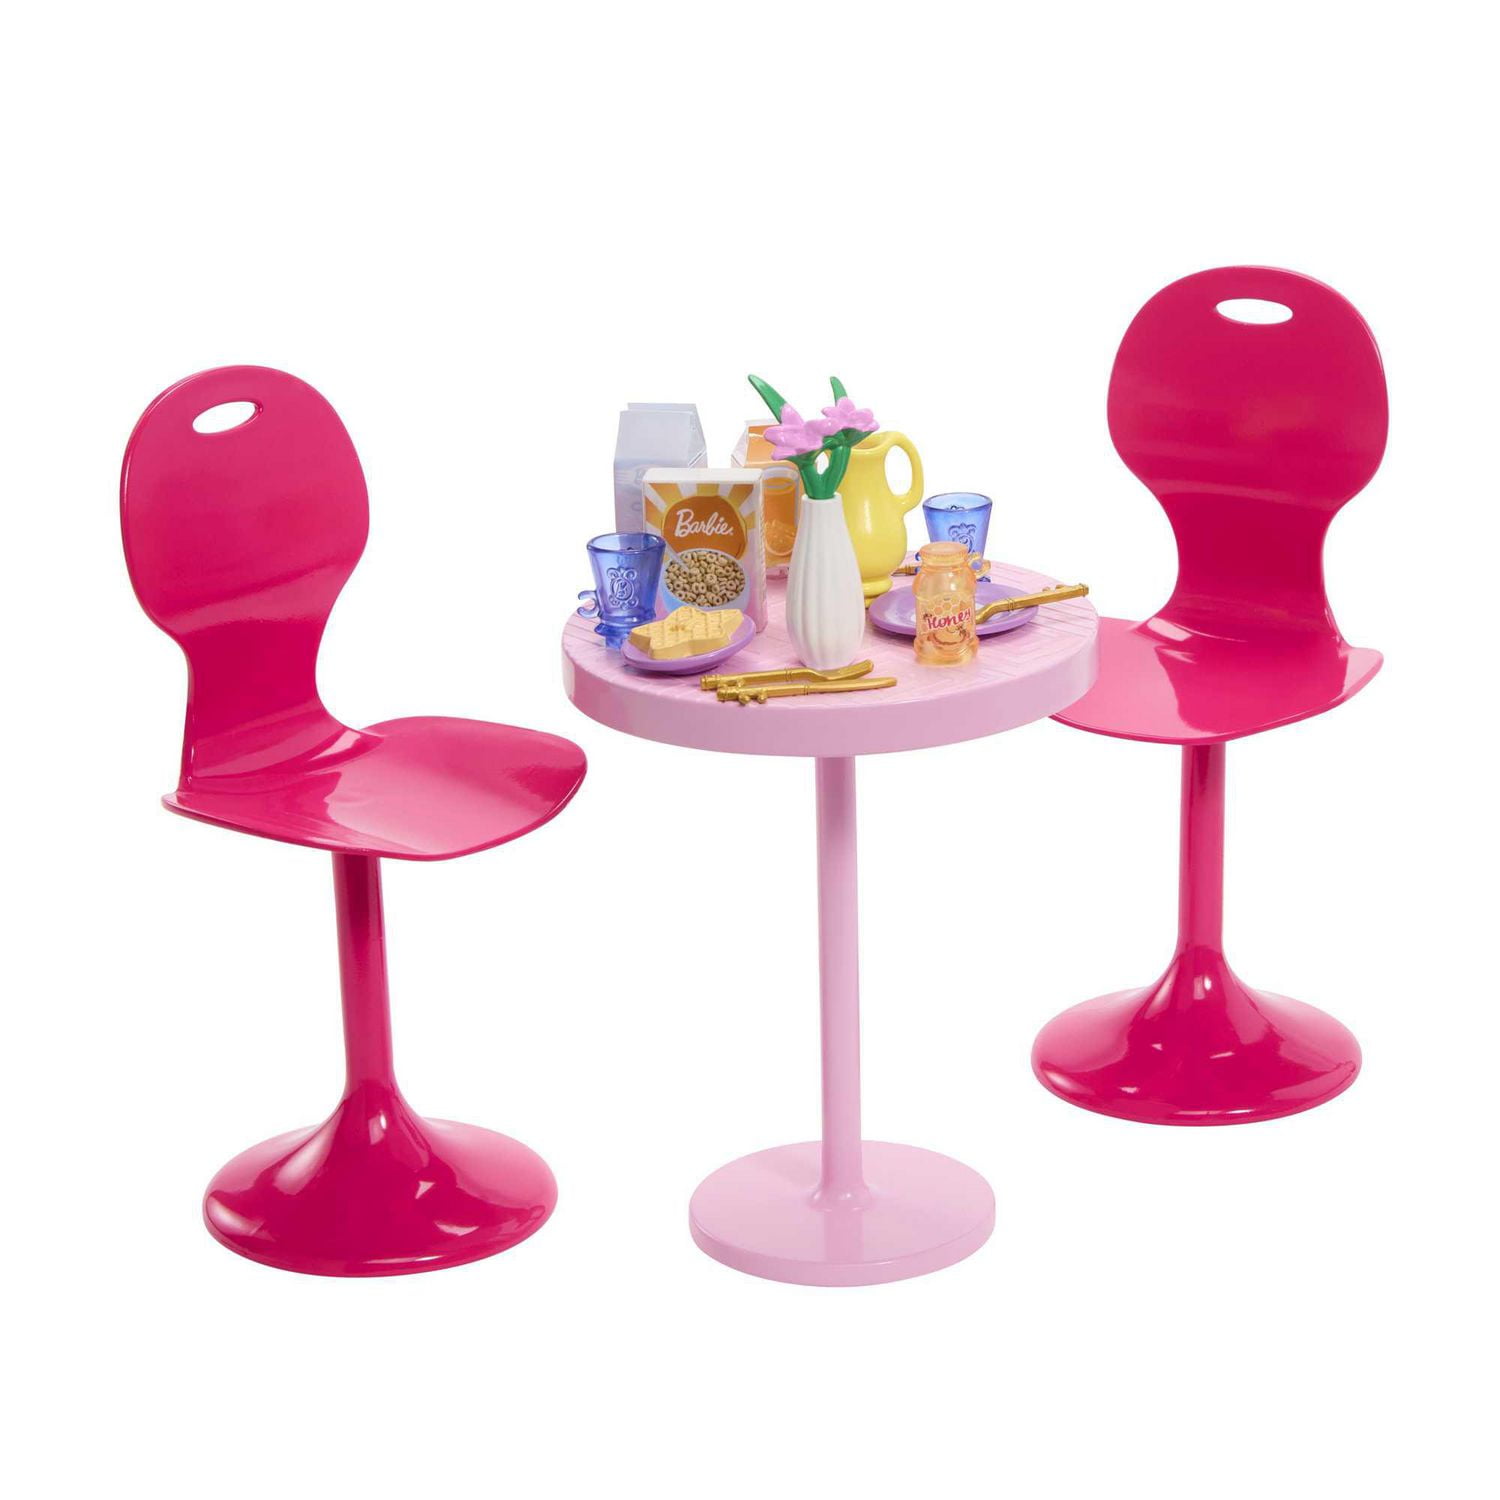 Barbie Accessories, Doll House Furniture, Breakfast Story Starter